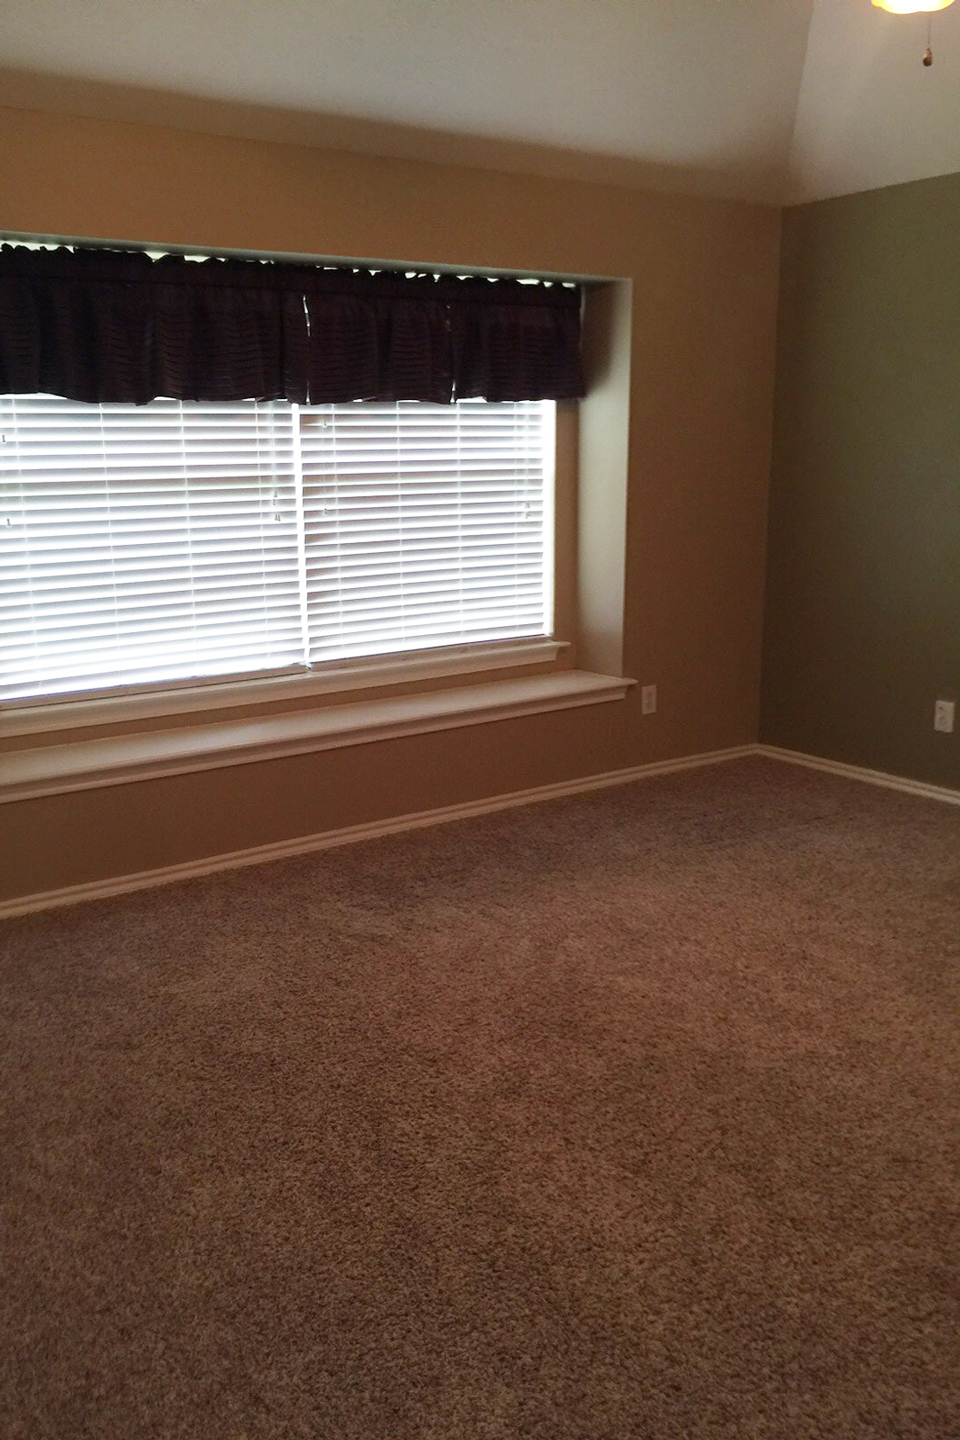 A before image of a dark carpeted bedroom